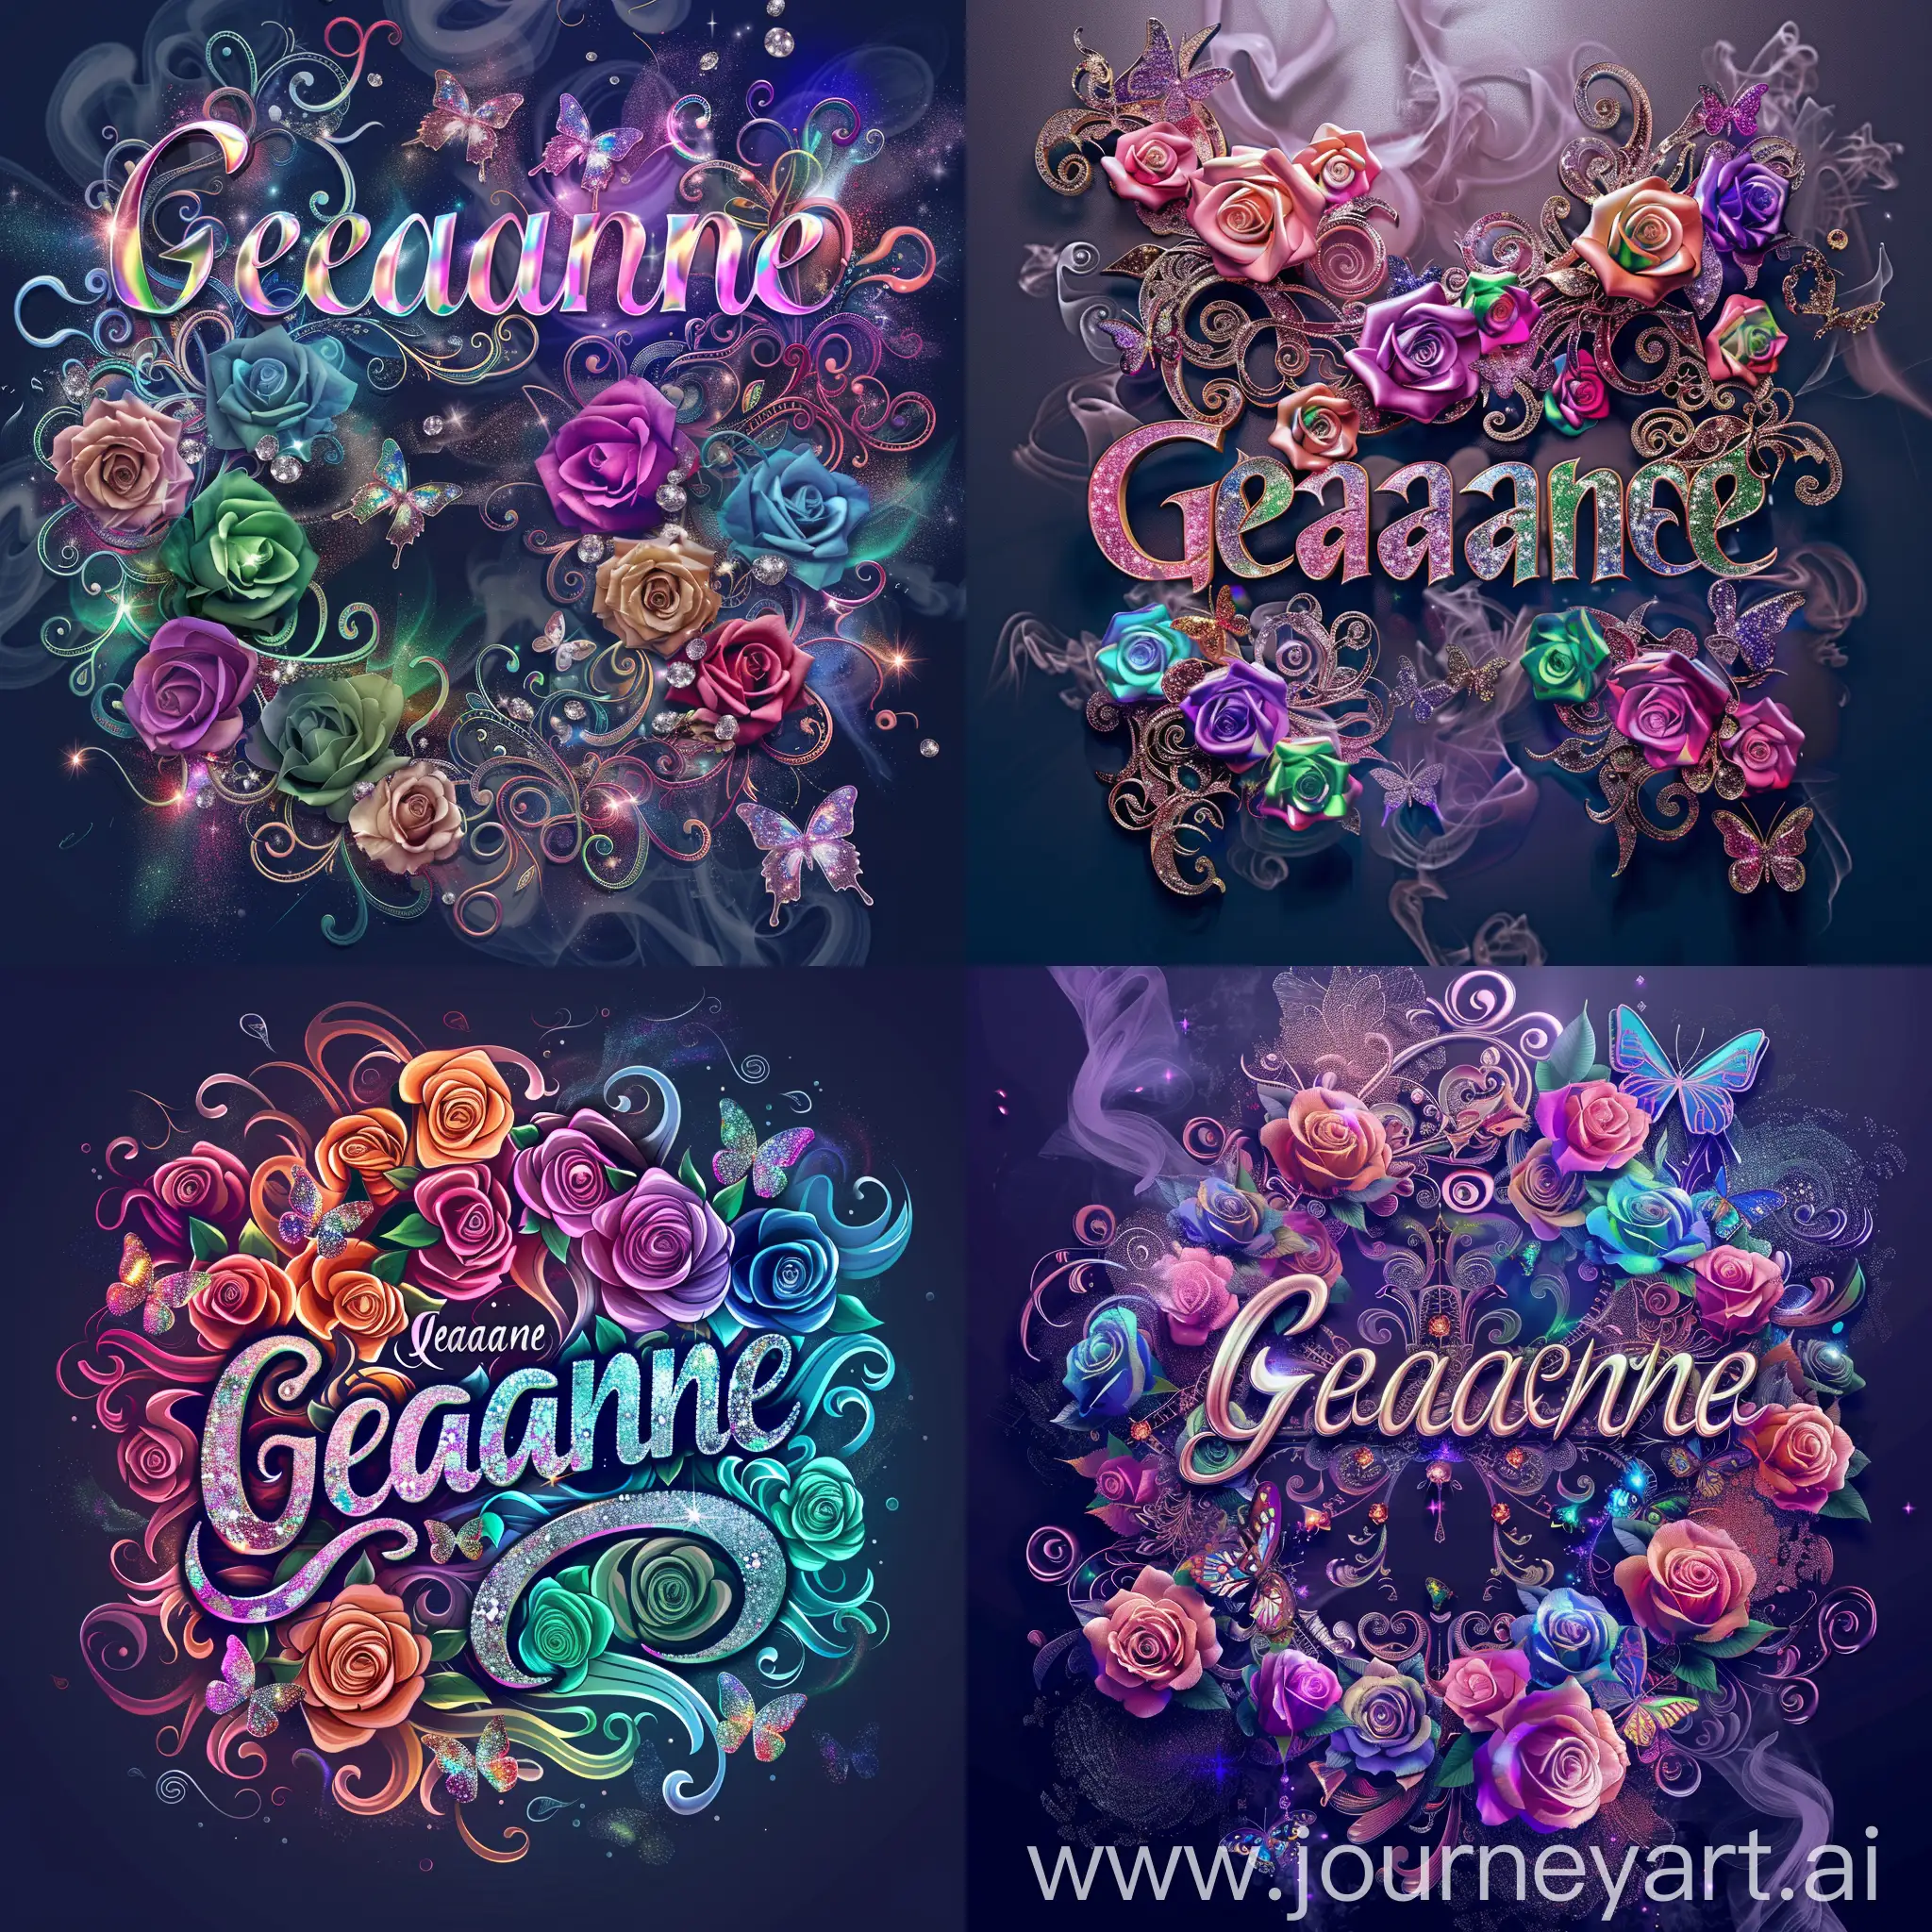 Geannene-Iridescent-Roses-and-Glittering-Butterflies-in-Epic-Smoke